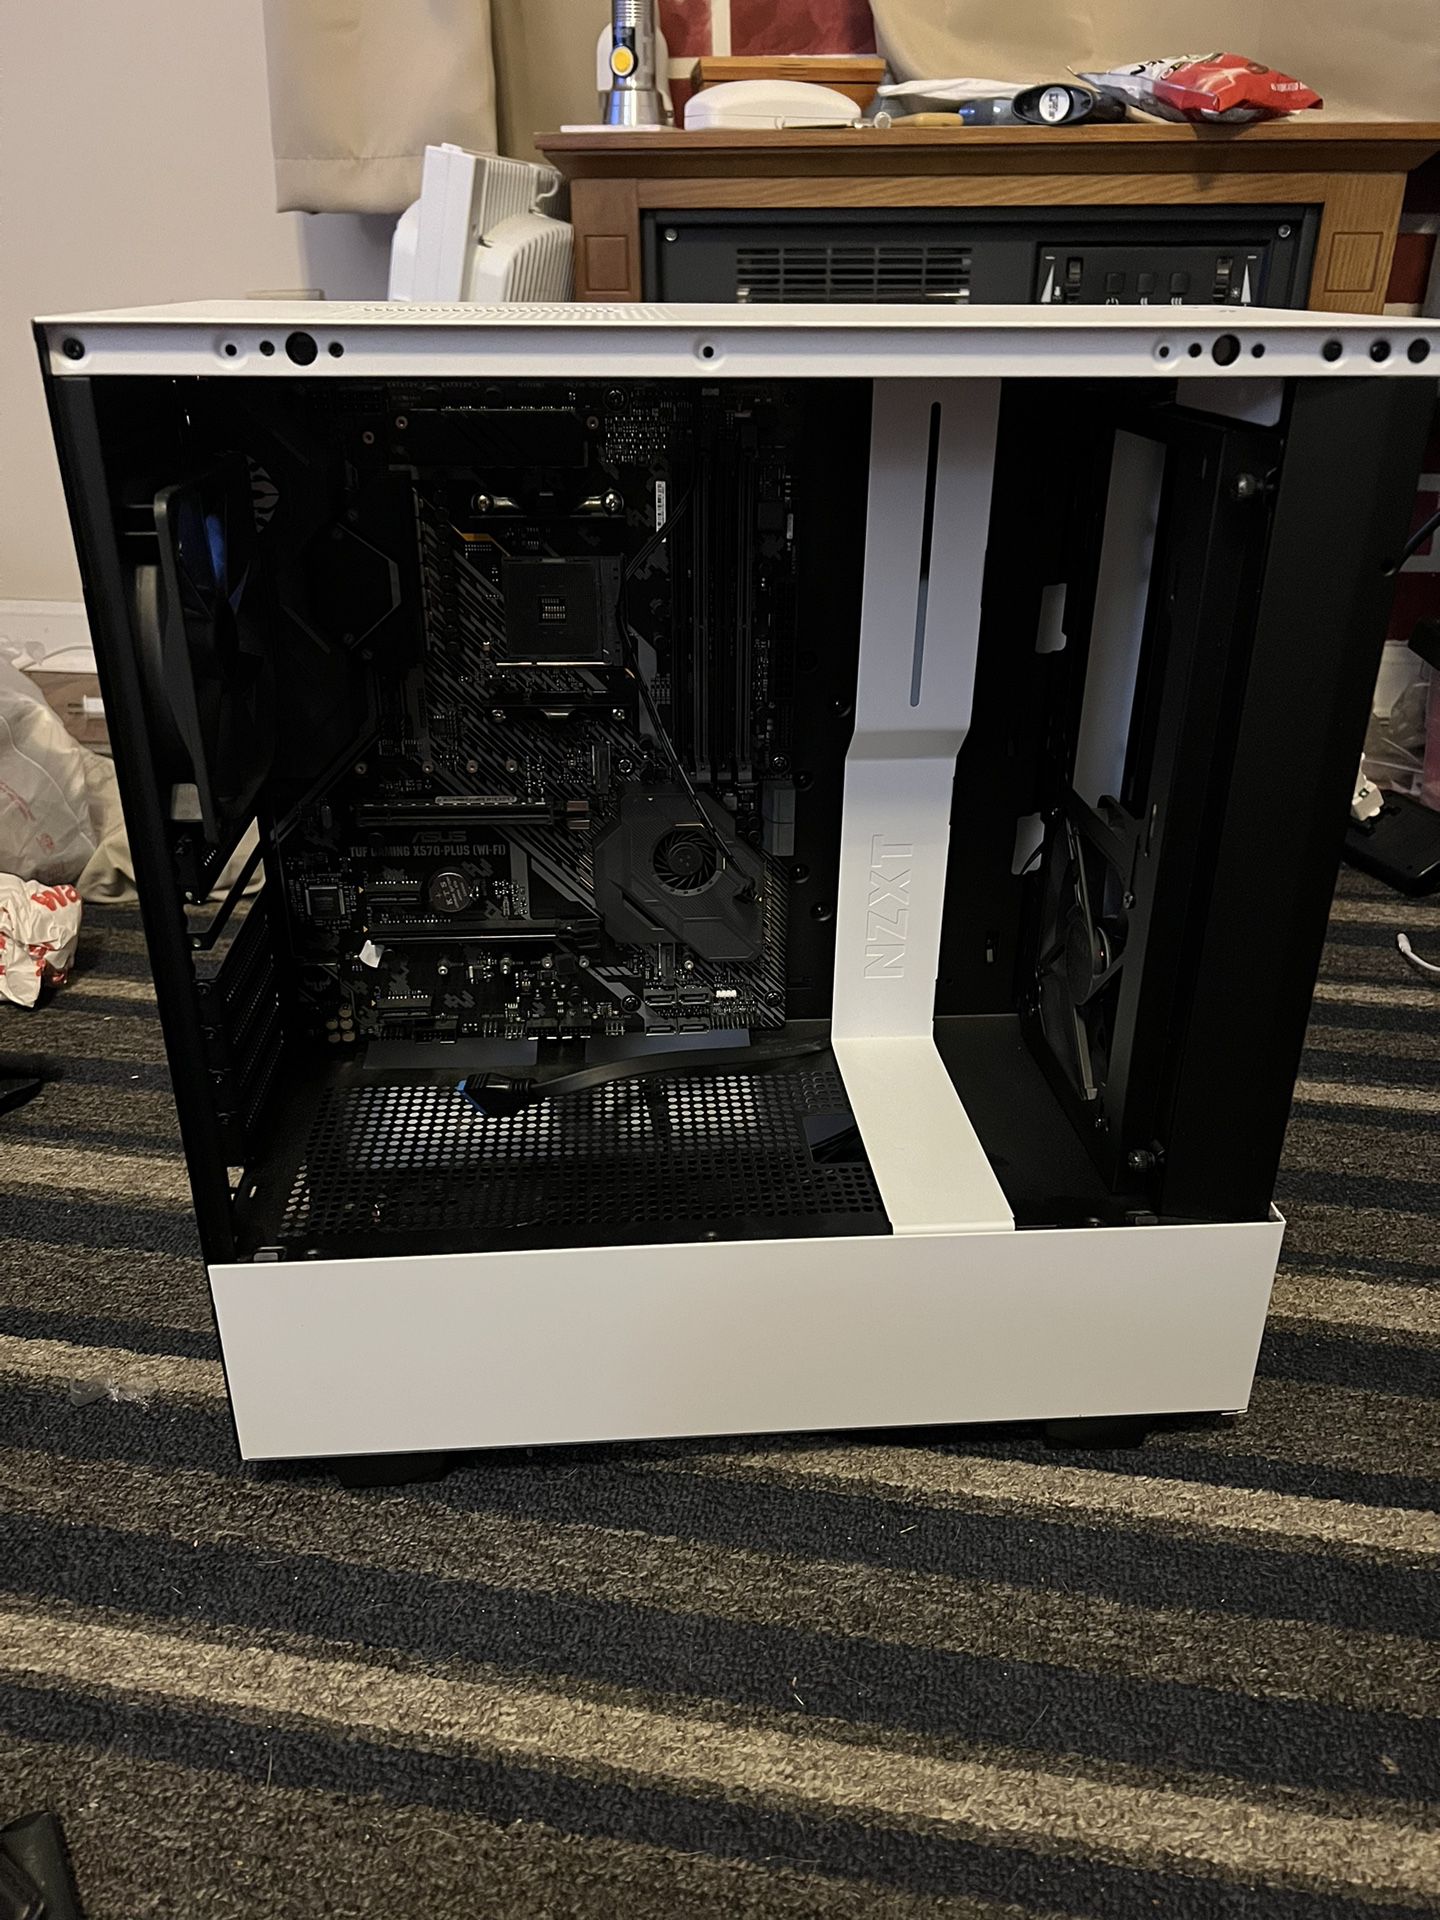 NZXT Mid Tower And Asus Motherboard With WiFi